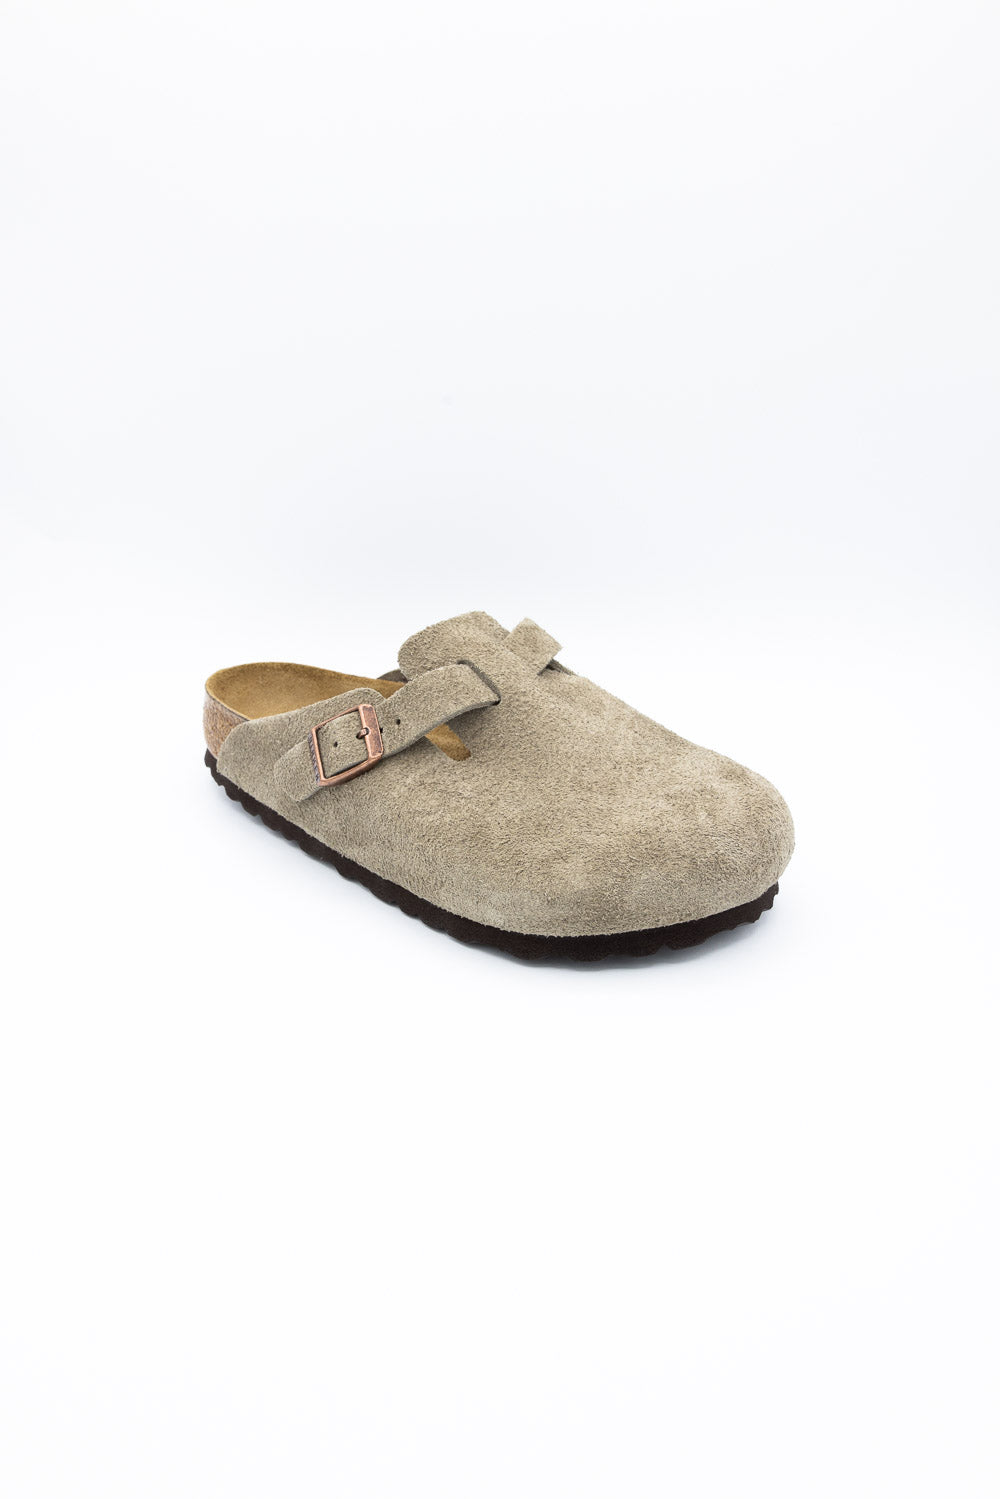 Birkenstock Boston Soft Footbed Suede Leather Clogs for Women in ...